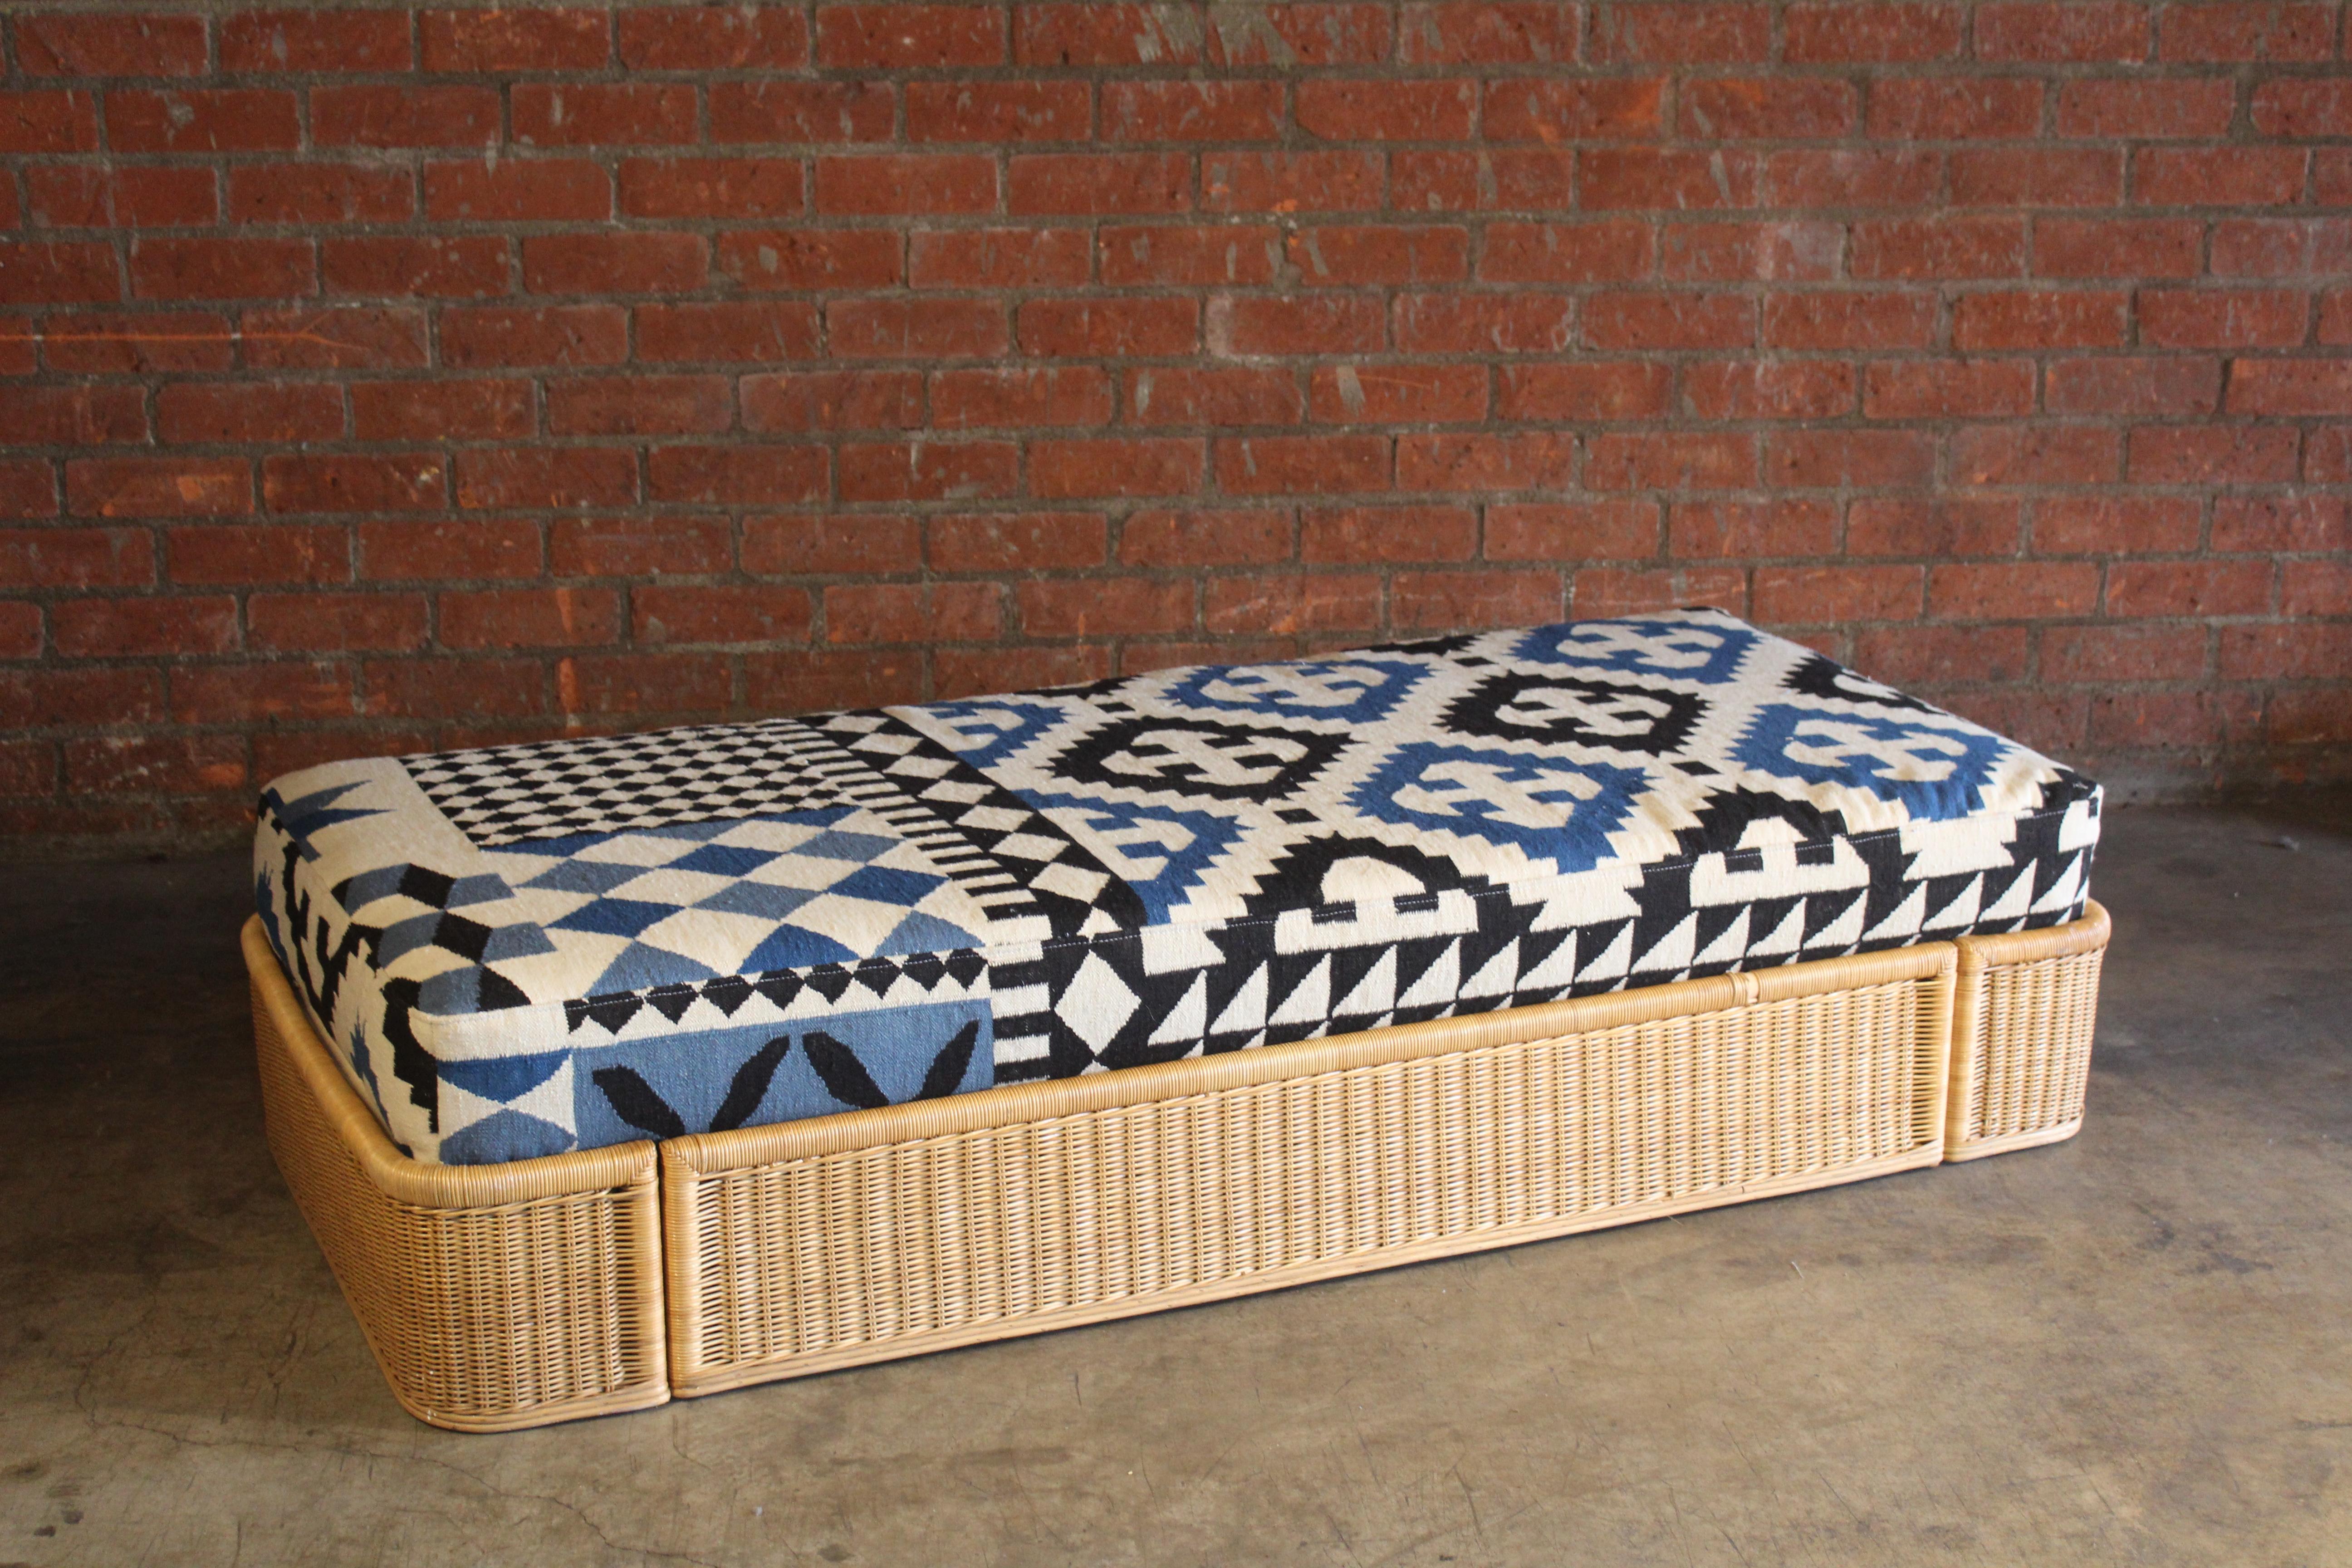 A vintage Italian 1960s wicker and bamboo daybed, upholstered in a vintage flatweave wool rug. The rug was professionally cleaned prior to upholstery. Daybed is in good condition with minimal wear. There is one small area with broken wicker.